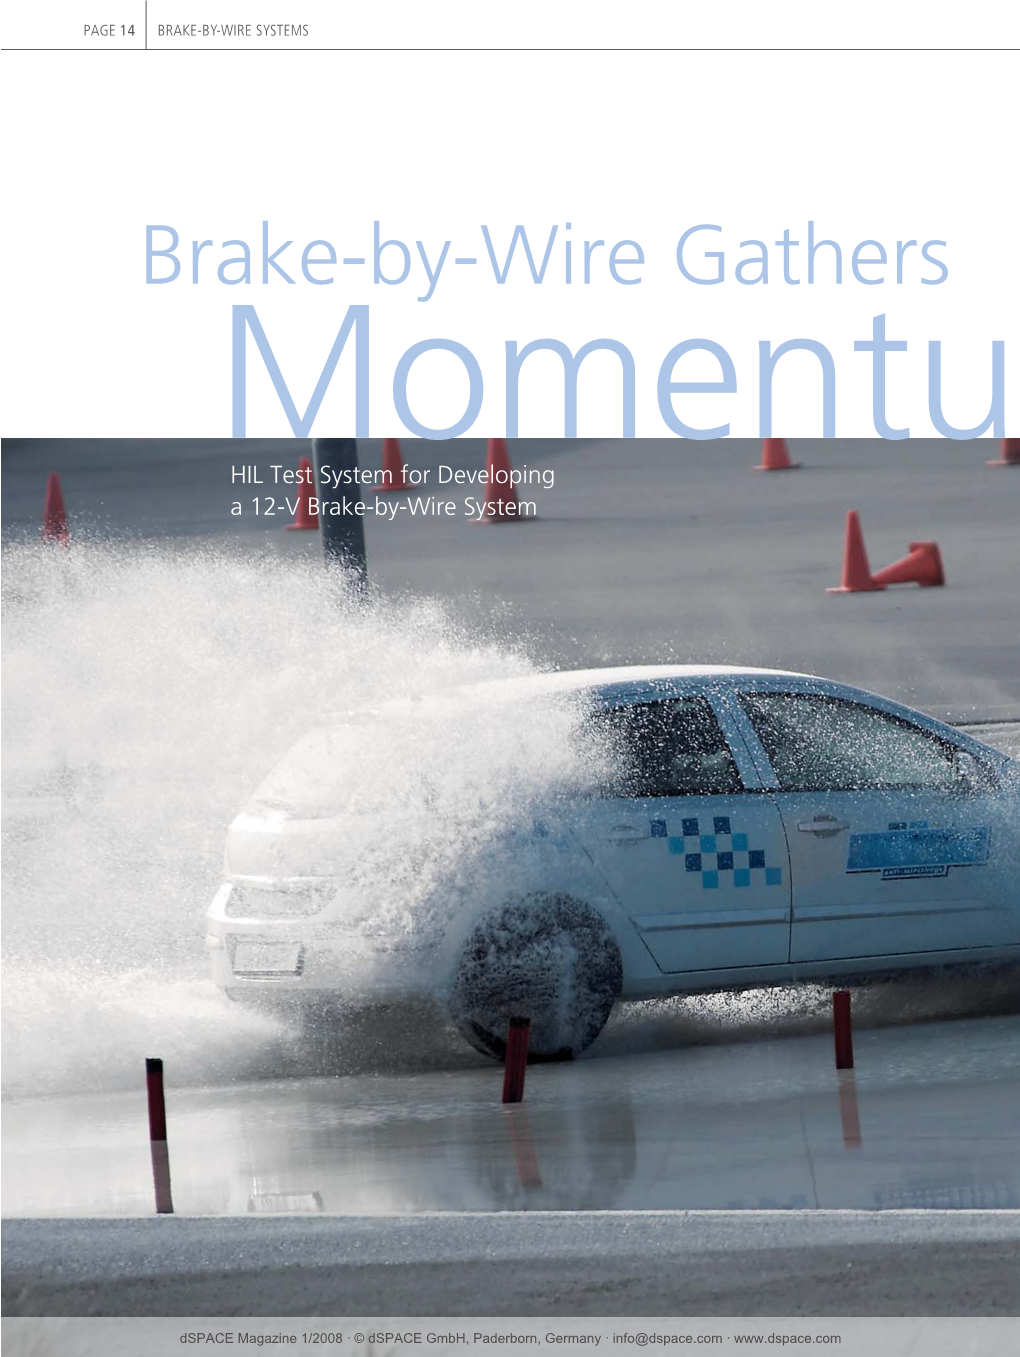 Continental: Brake-By-Wire Gathers Momentum